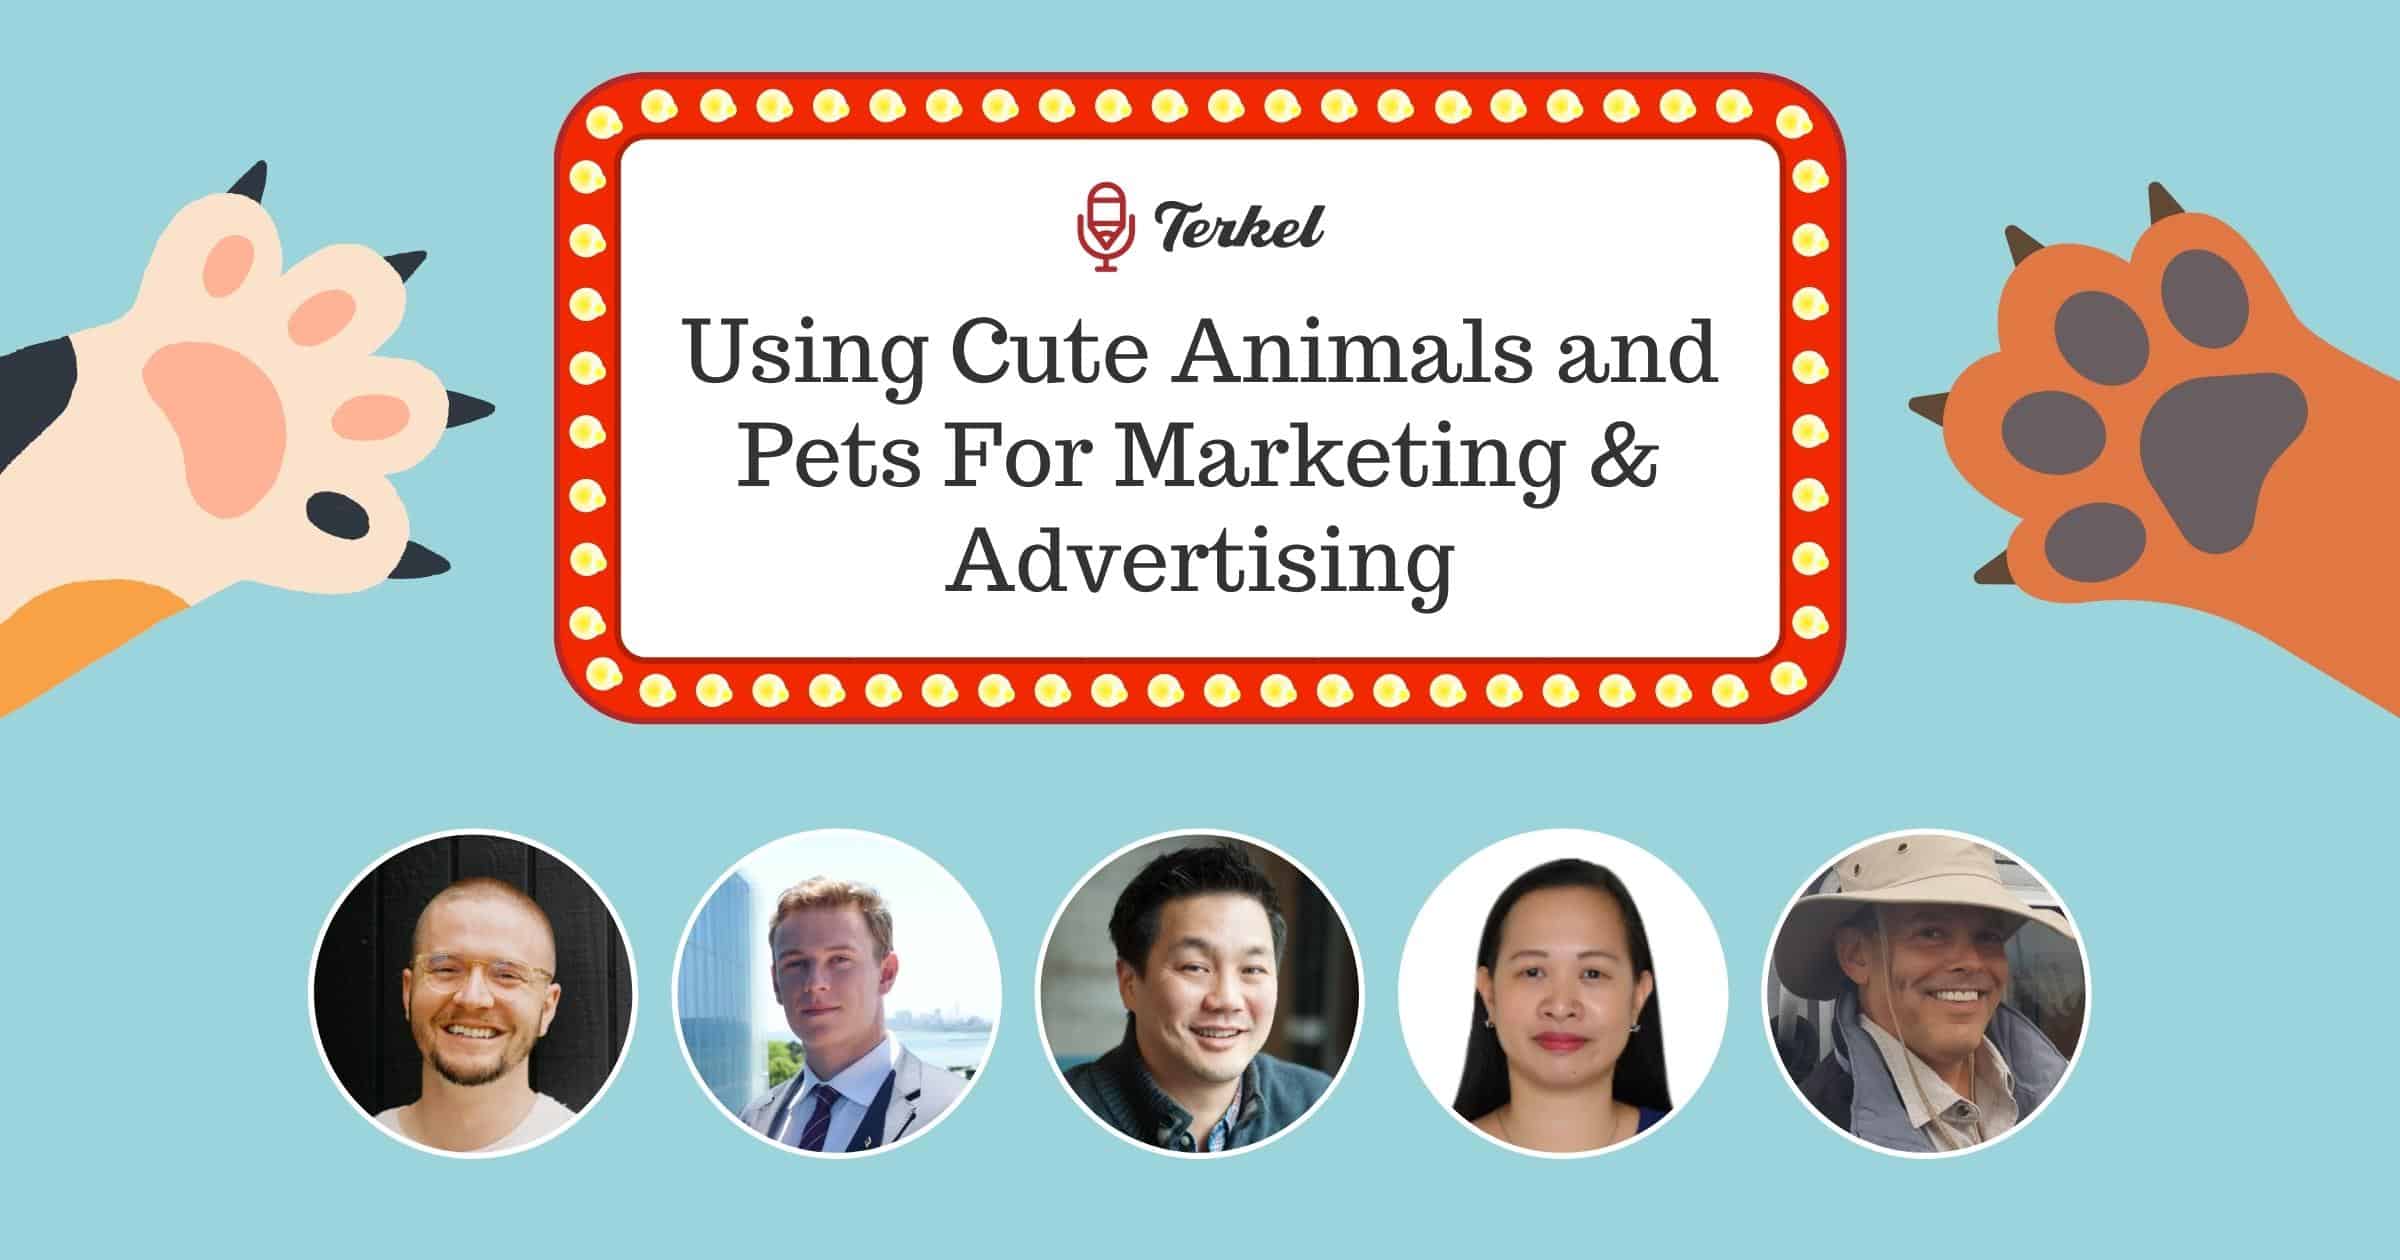 Using Cute Animals and Pets For Marketing & Advertising